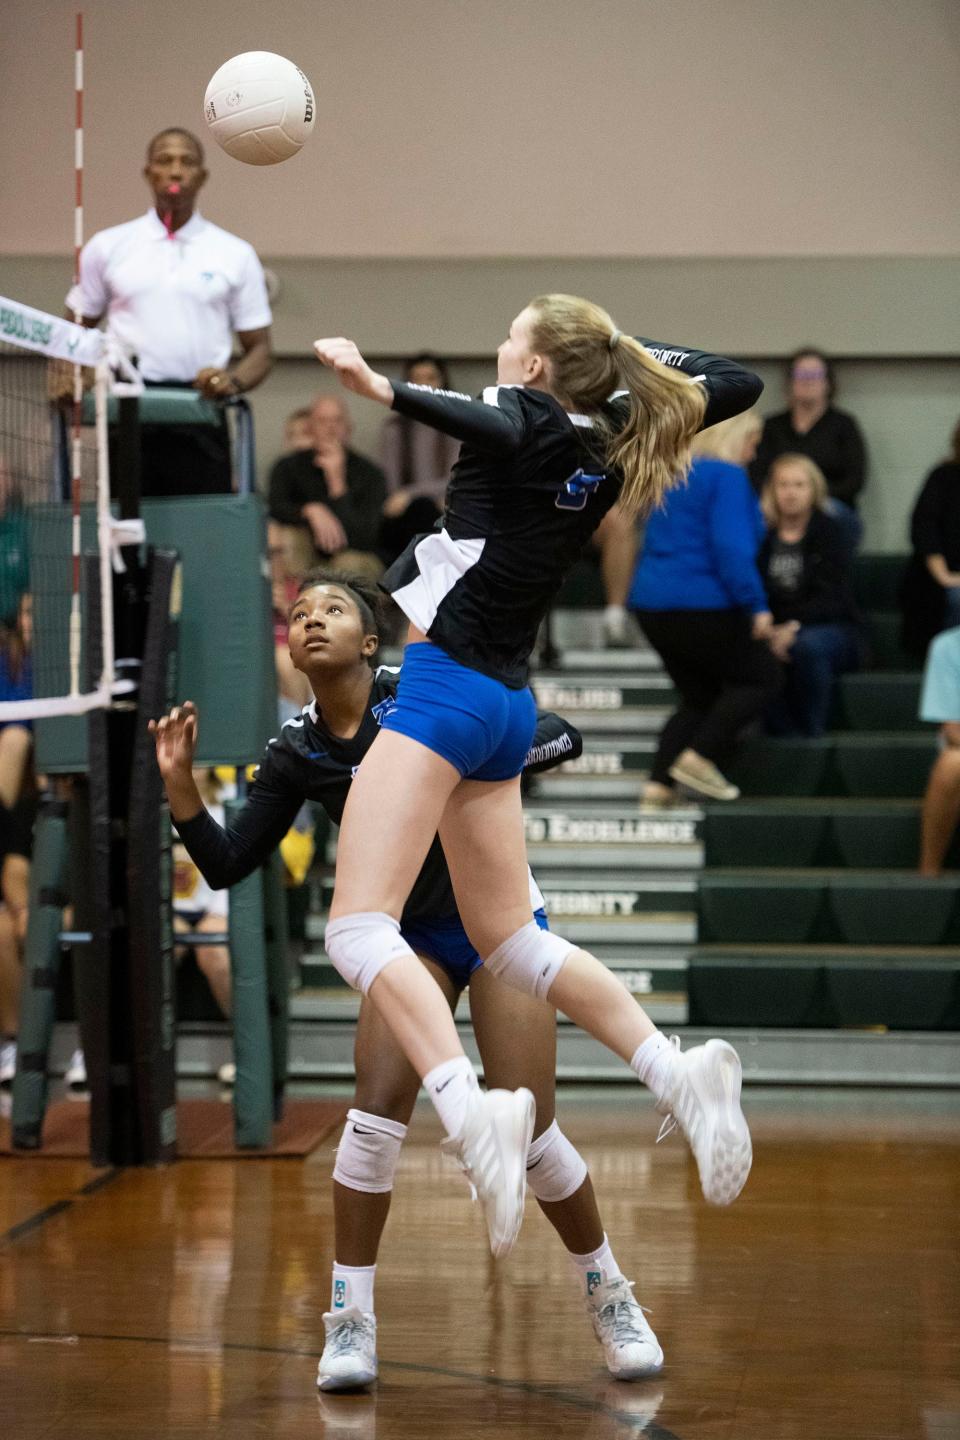 Trinity Christian's Ariel Ross (No. 9) watches as teammate Hadley Dantzler (No. 8) smashes the ball over the net during the 2021 volleyball regionals. The Conquerors play Ocala Trinity Catholic on Tuesday, seeking a trip to the state semifinal.